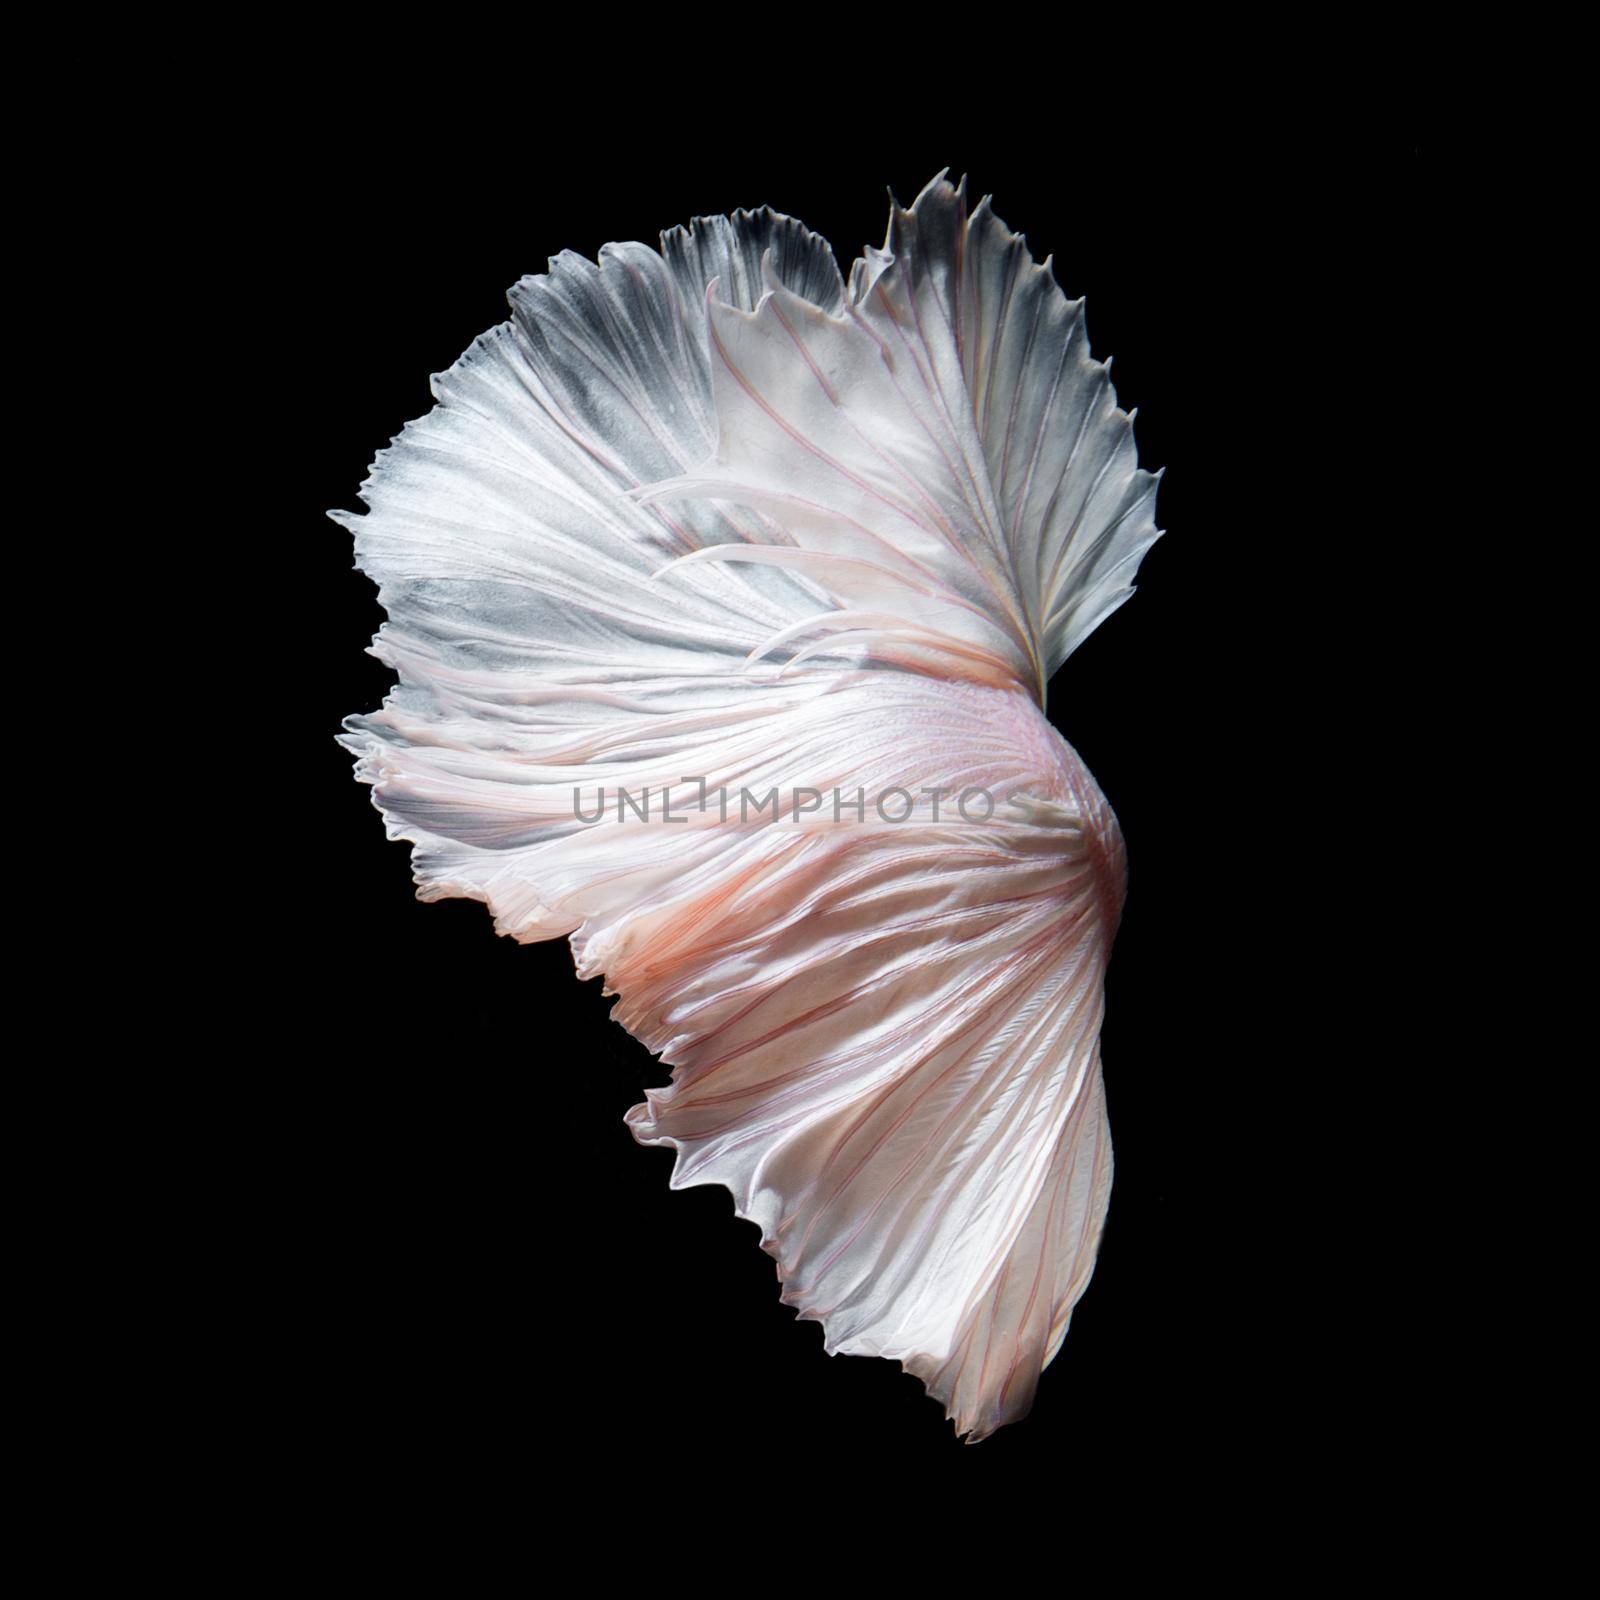 Betta fish,Siamese fighting fish in movement isolated on black background